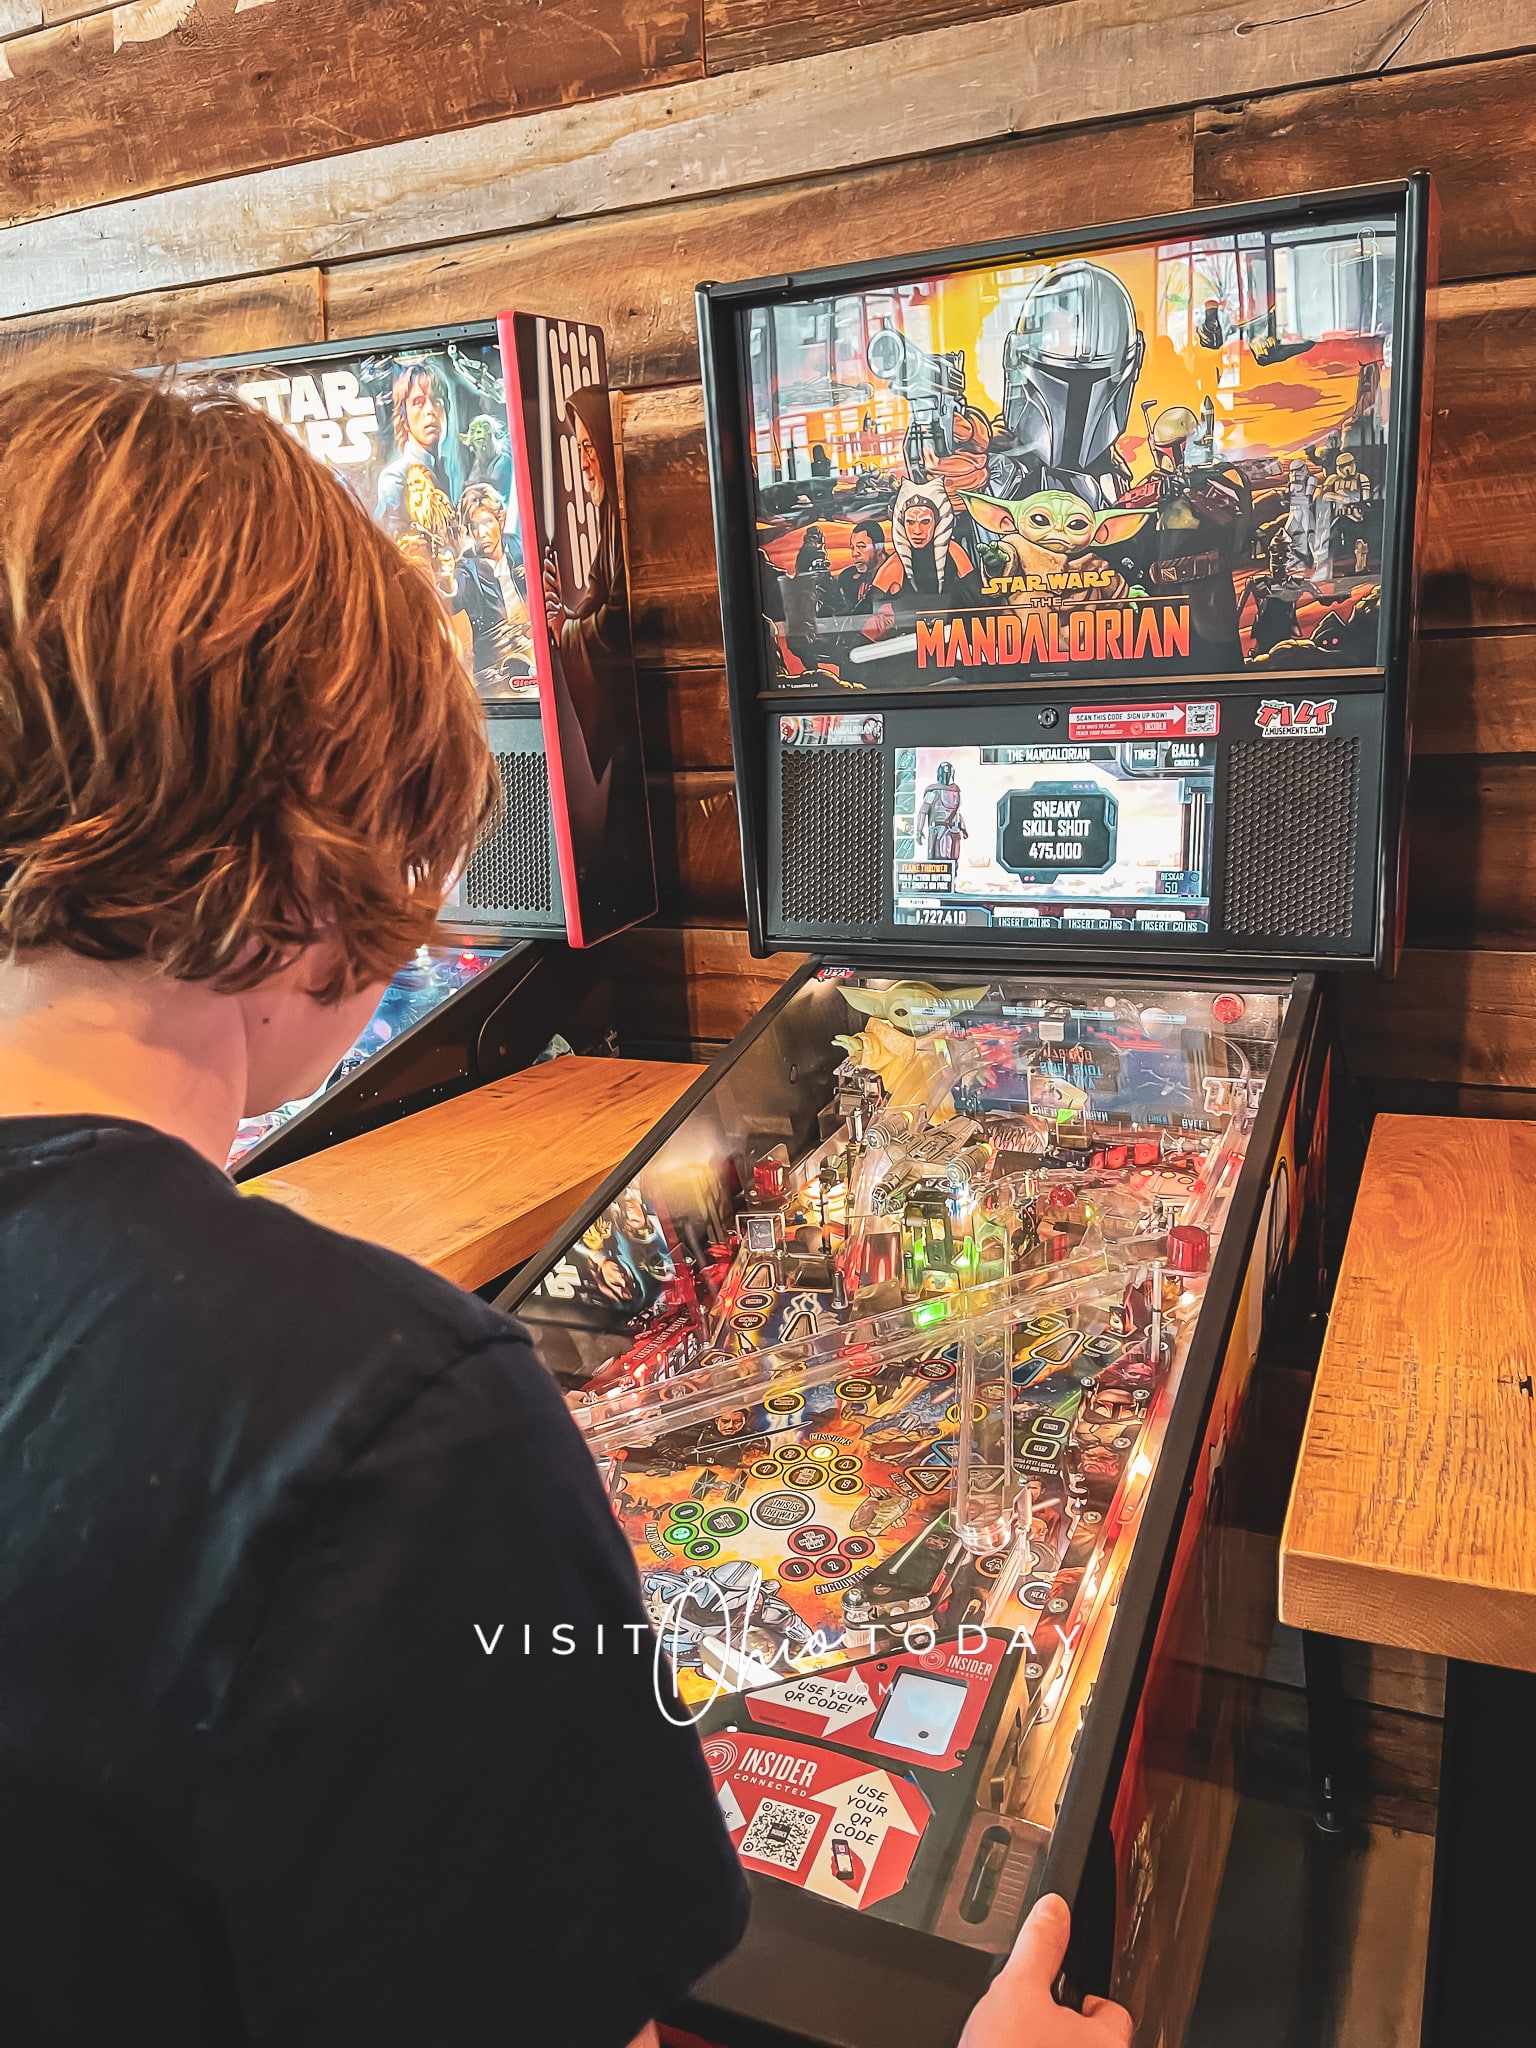 IMAGE of boy playing a pinball machine that is lighting up Photo credit: Cindy Gordon of VisitOhioToday.com